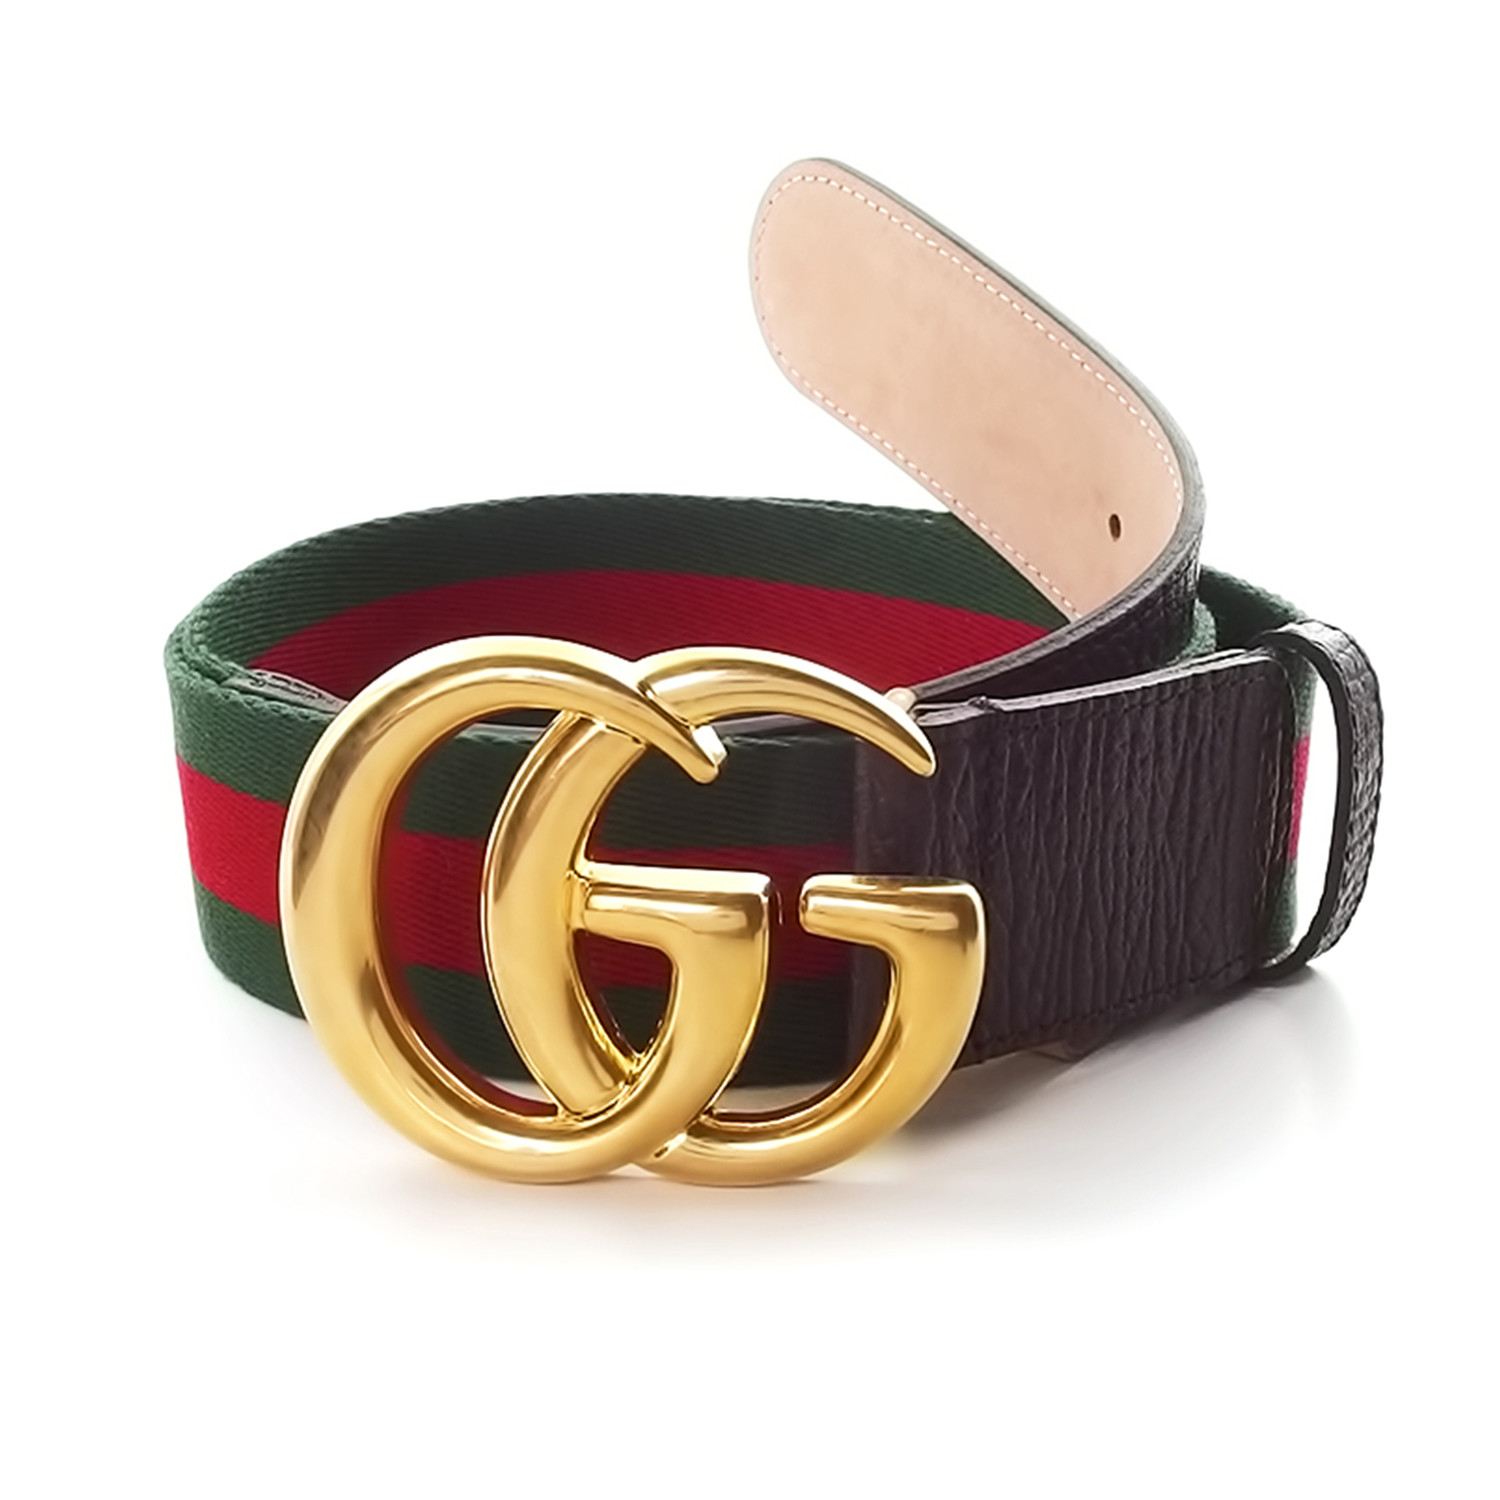 Contoured GG Stripe Ribbon Creased Belt // Green + Red + Gold (85) - Gucci Belts - Touch of Modern